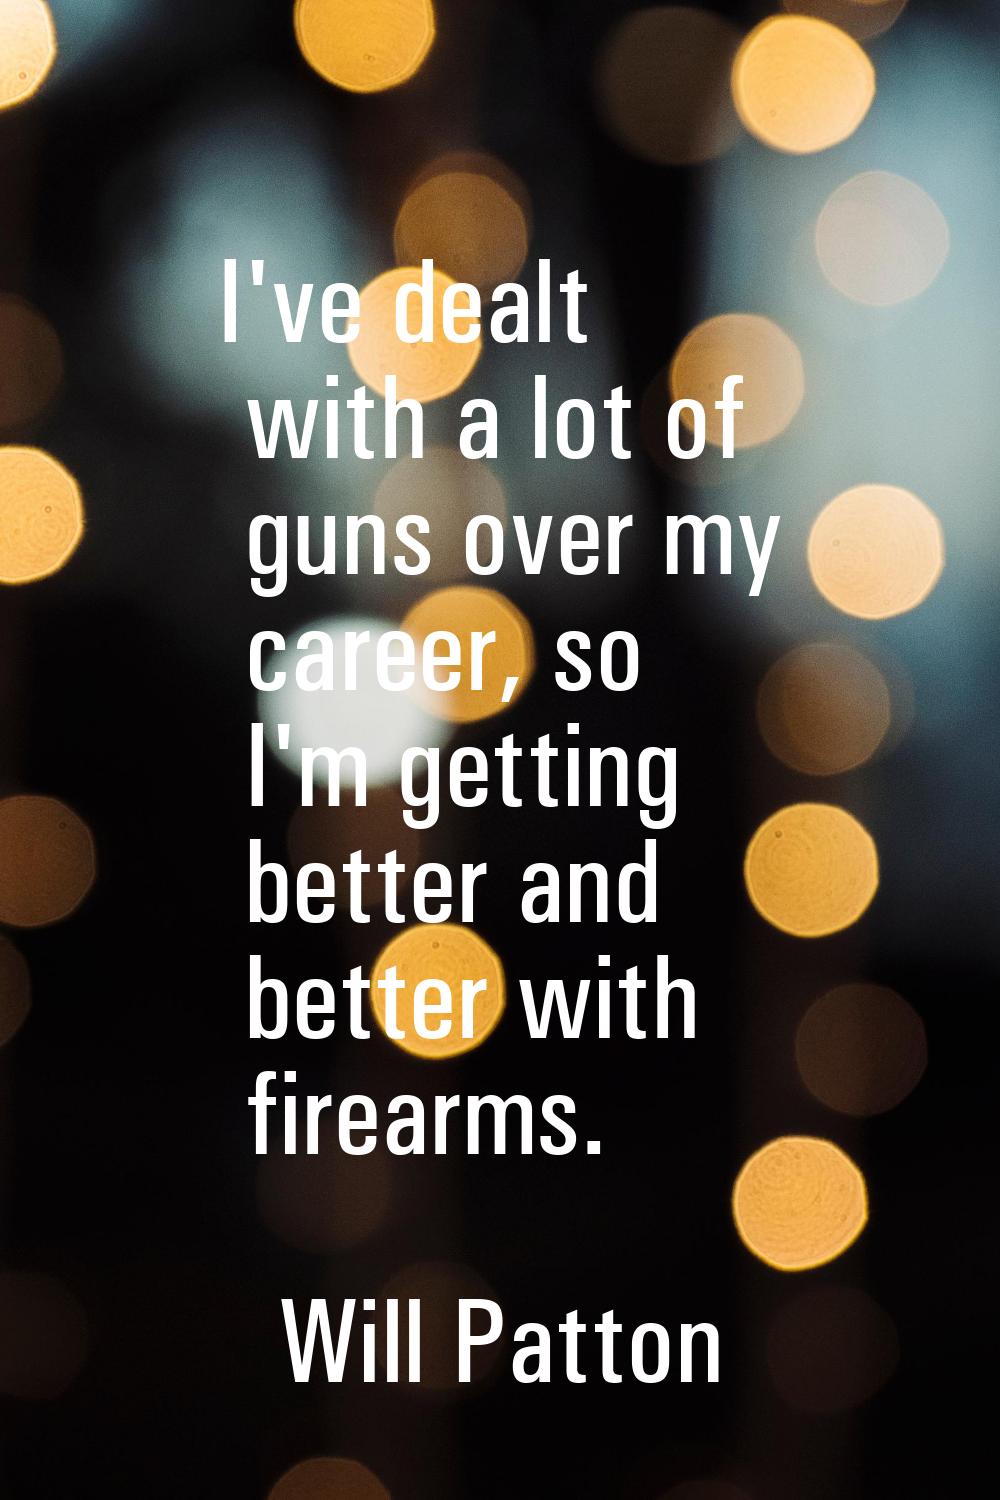 I've dealt with a lot of guns over my career, so I'm getting better and better with firearms.